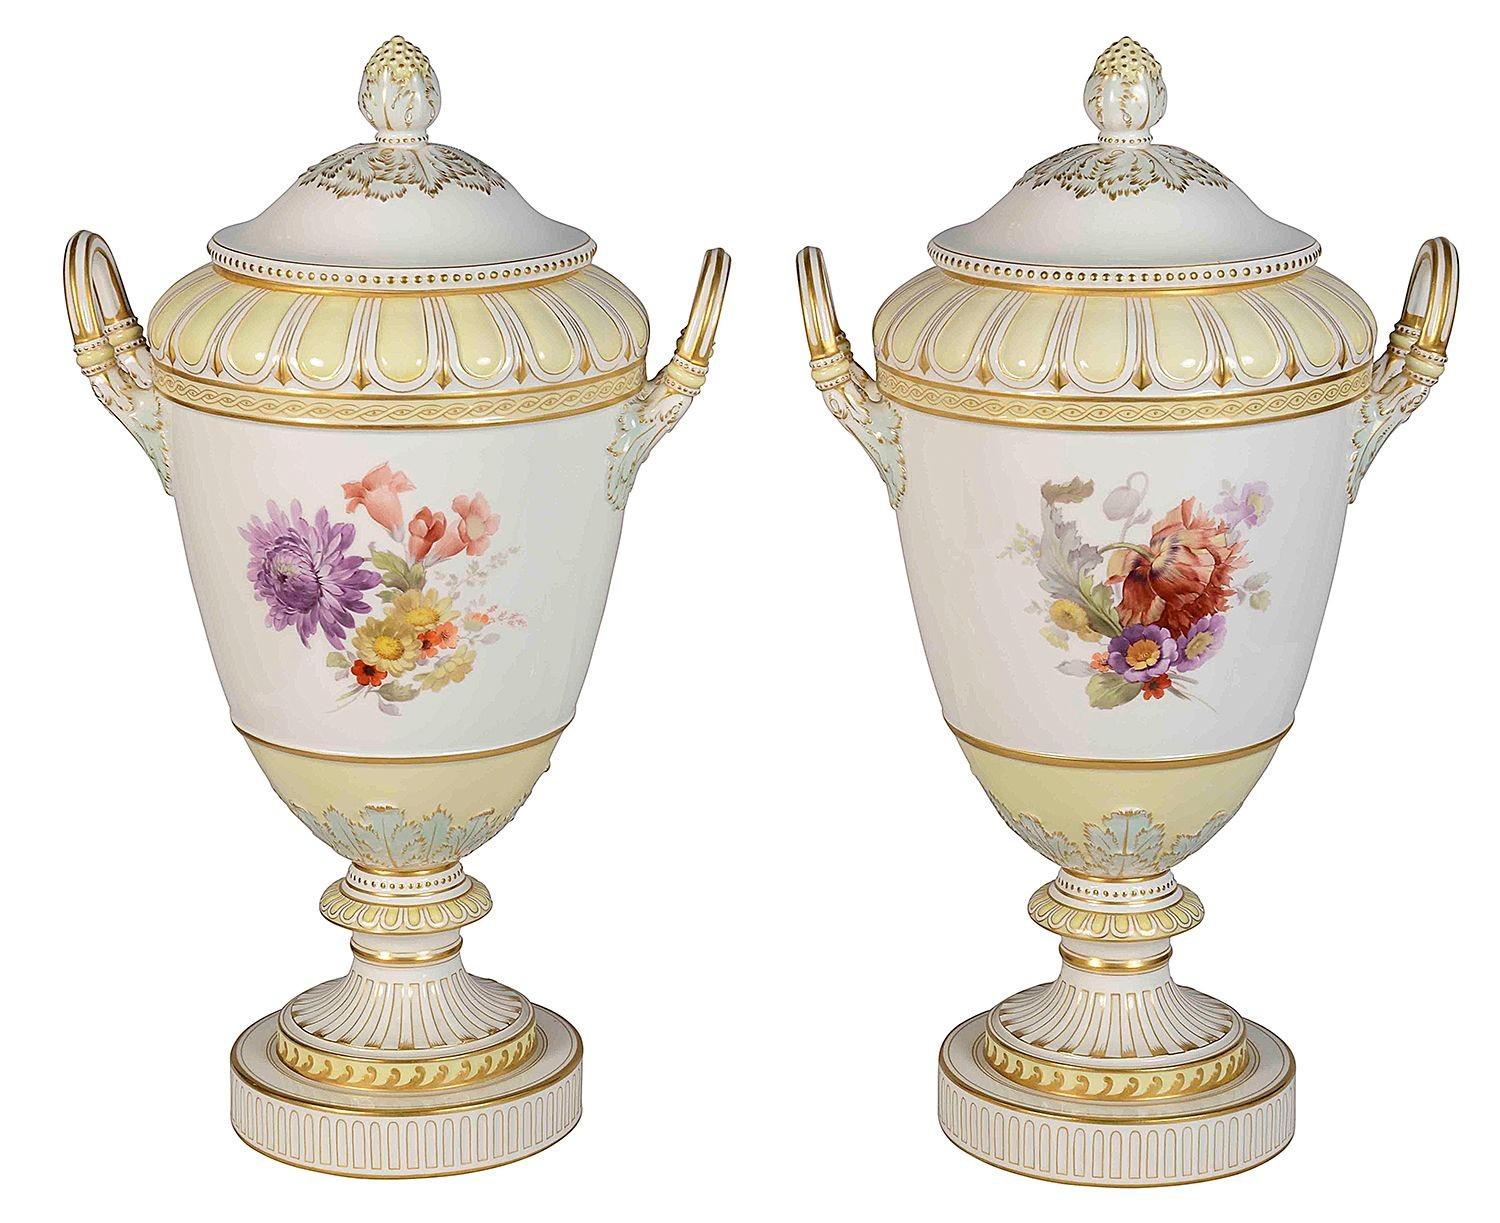 A very good quality pair of late 19th Century Austrian porcelain KPM lidded vases, with cream and white ground, gilded decoration, twin handles to each, hand painted scenes of lovers courting, the reverse side with colourful flowers. raised on